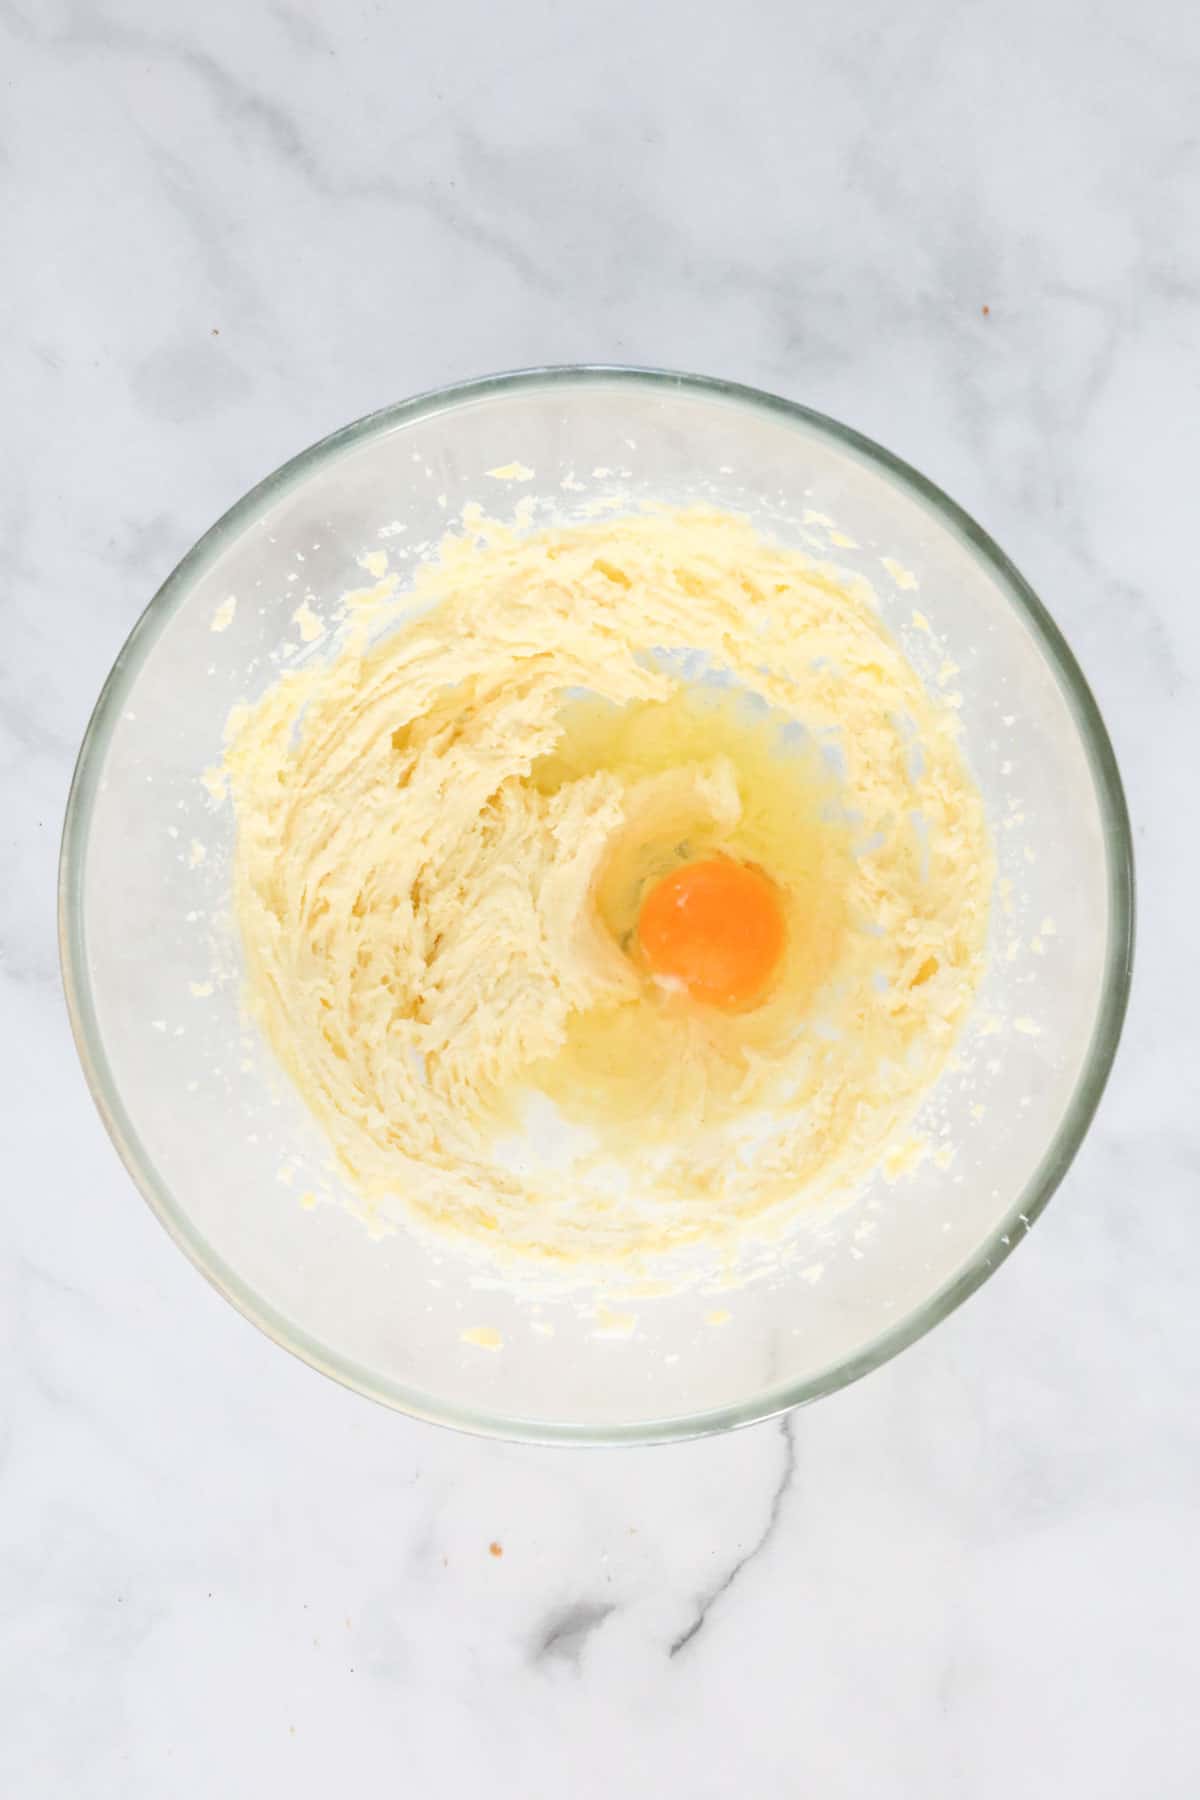 Creamy butter and sugar, with an egg added to the mixing bowl.